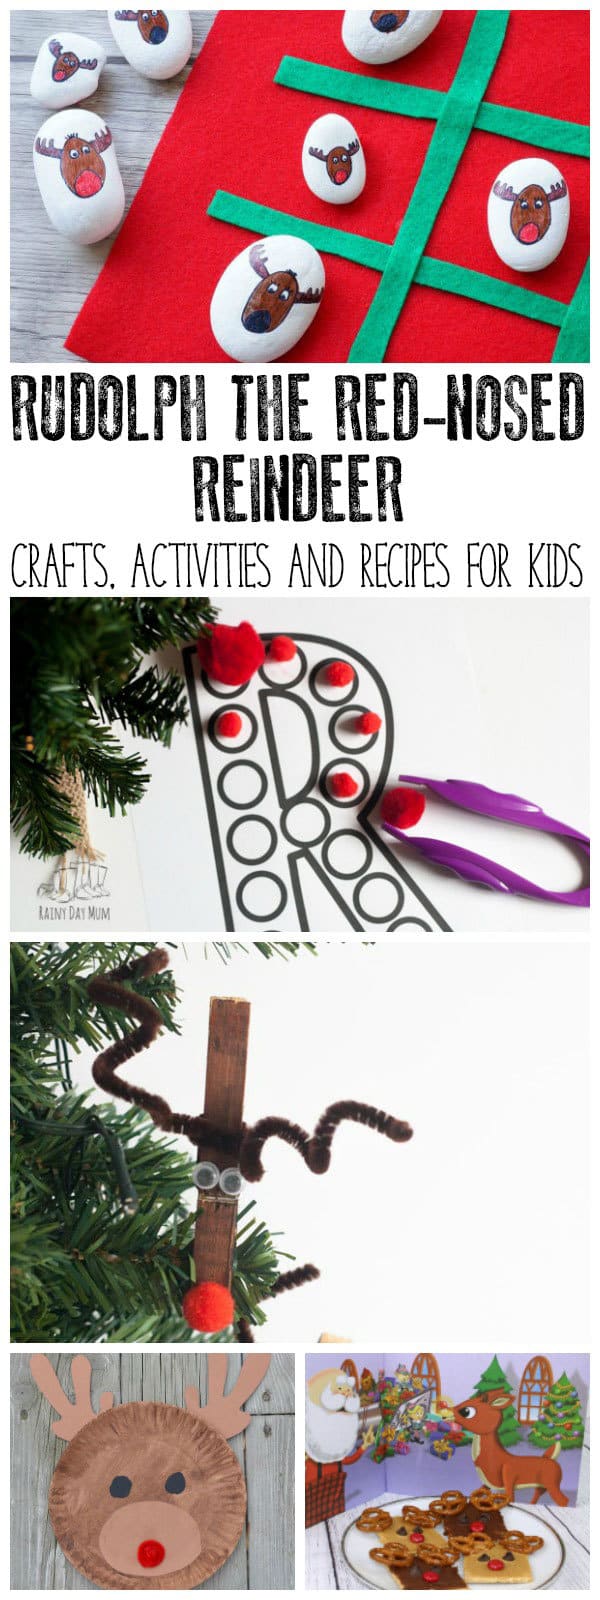 Inspired by Rudolph the Red-Nosed Reindeer these activities, crafts and recipes are ideal for kids of all ages to do, make and enjoy.